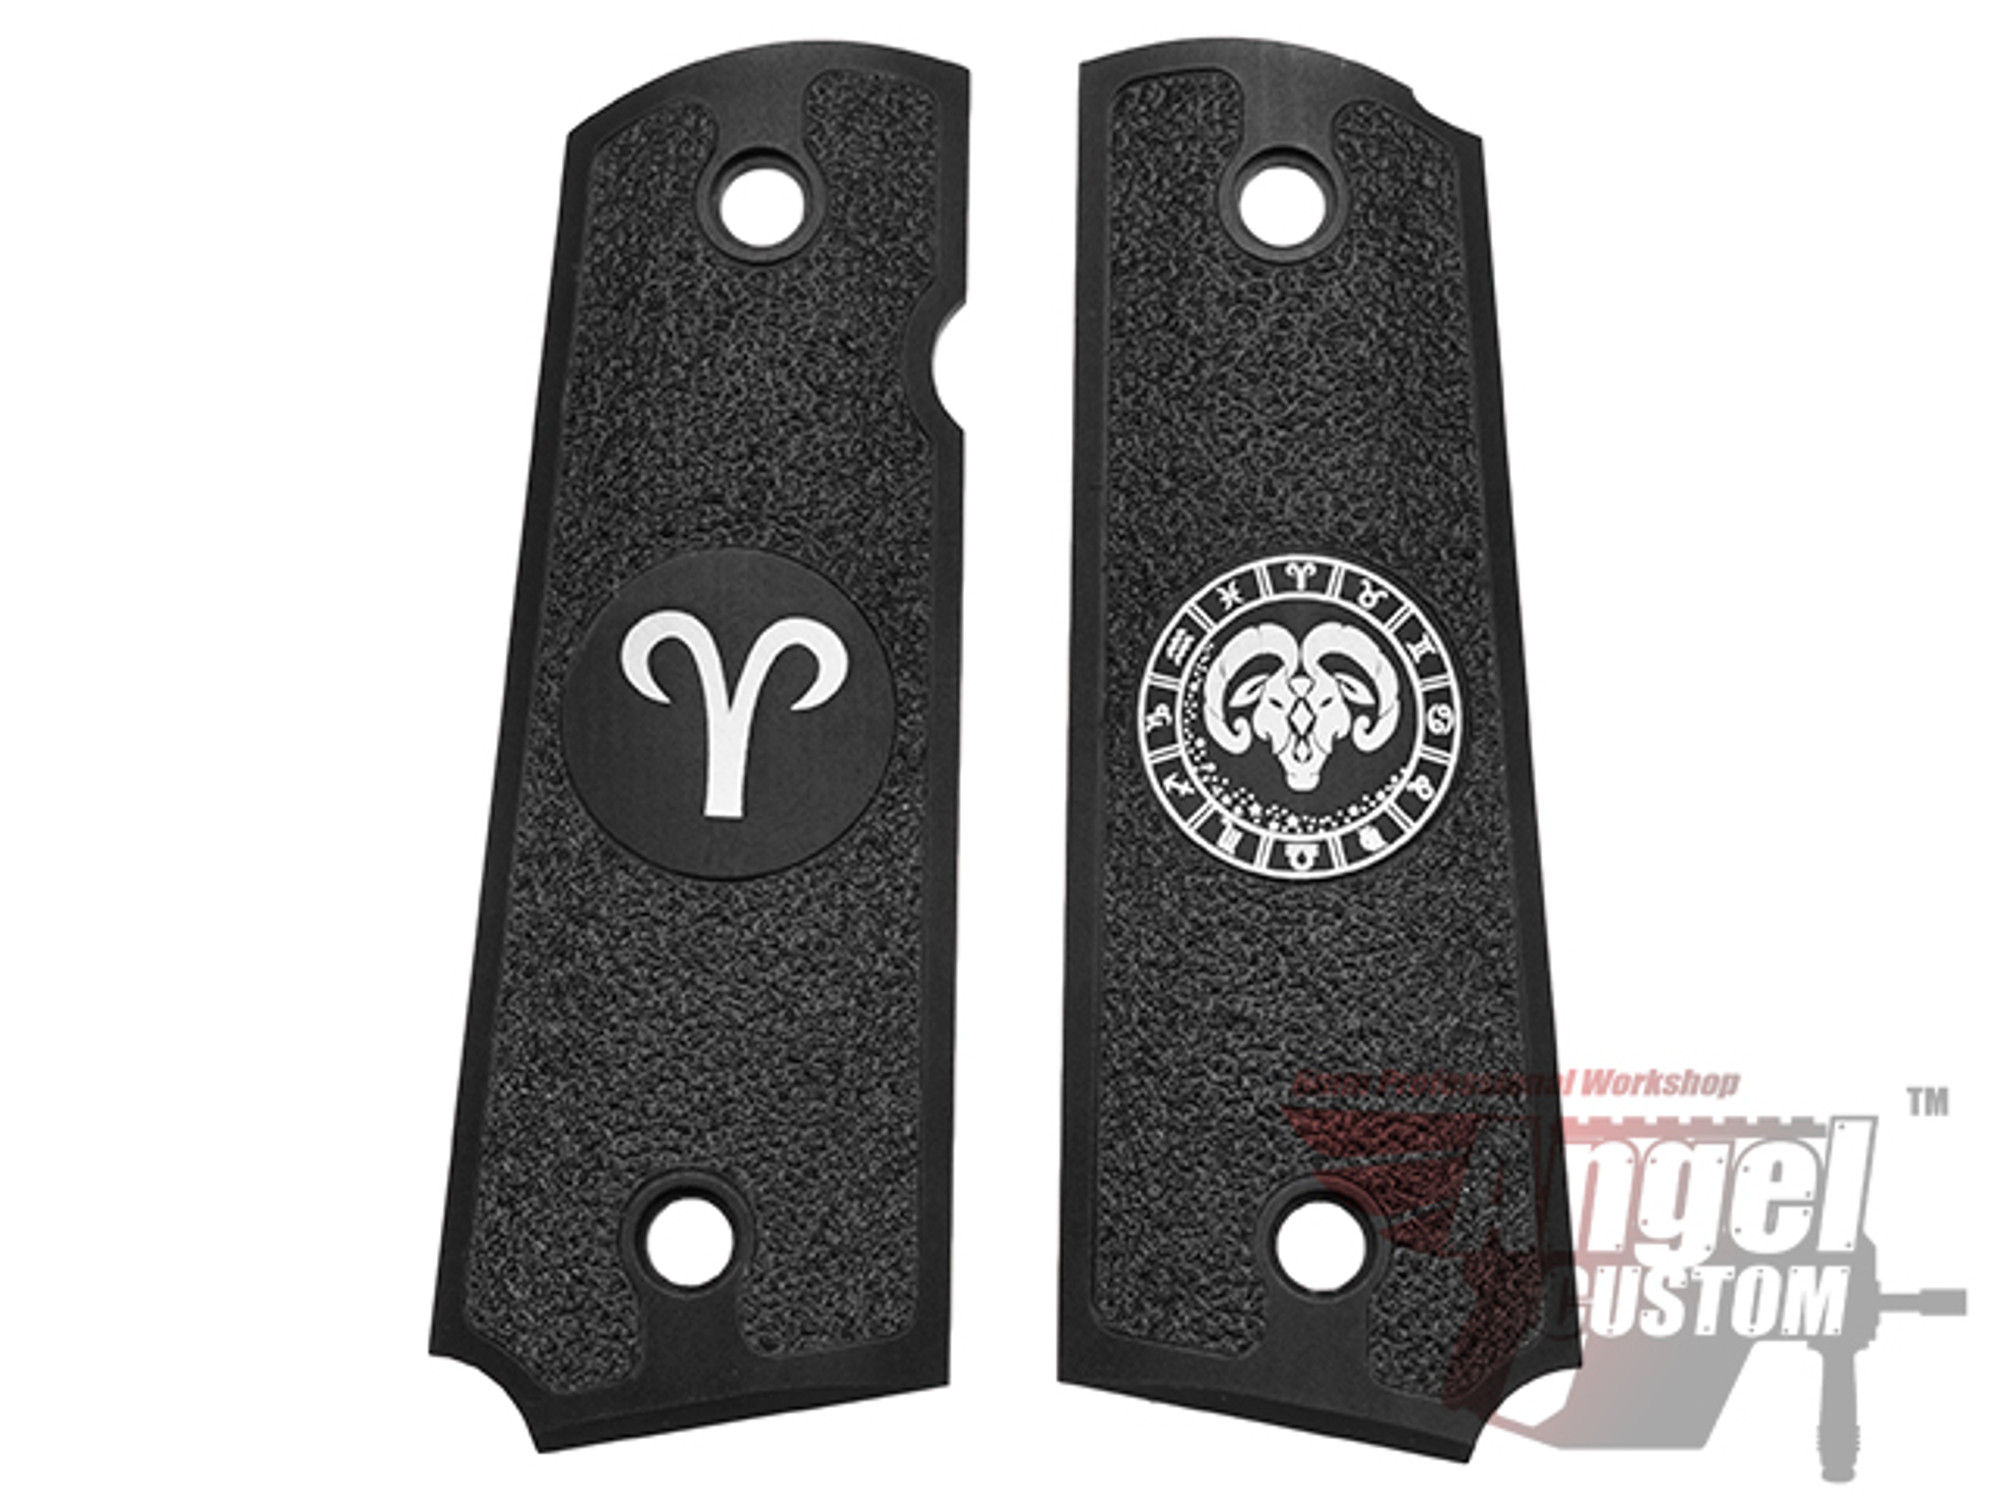 Angel Custom CNC Machined Tac-Glove "Zodiac" Grips for WE-Tech 1911 Series Airsoft Pistols - Black (Sign: Aries)